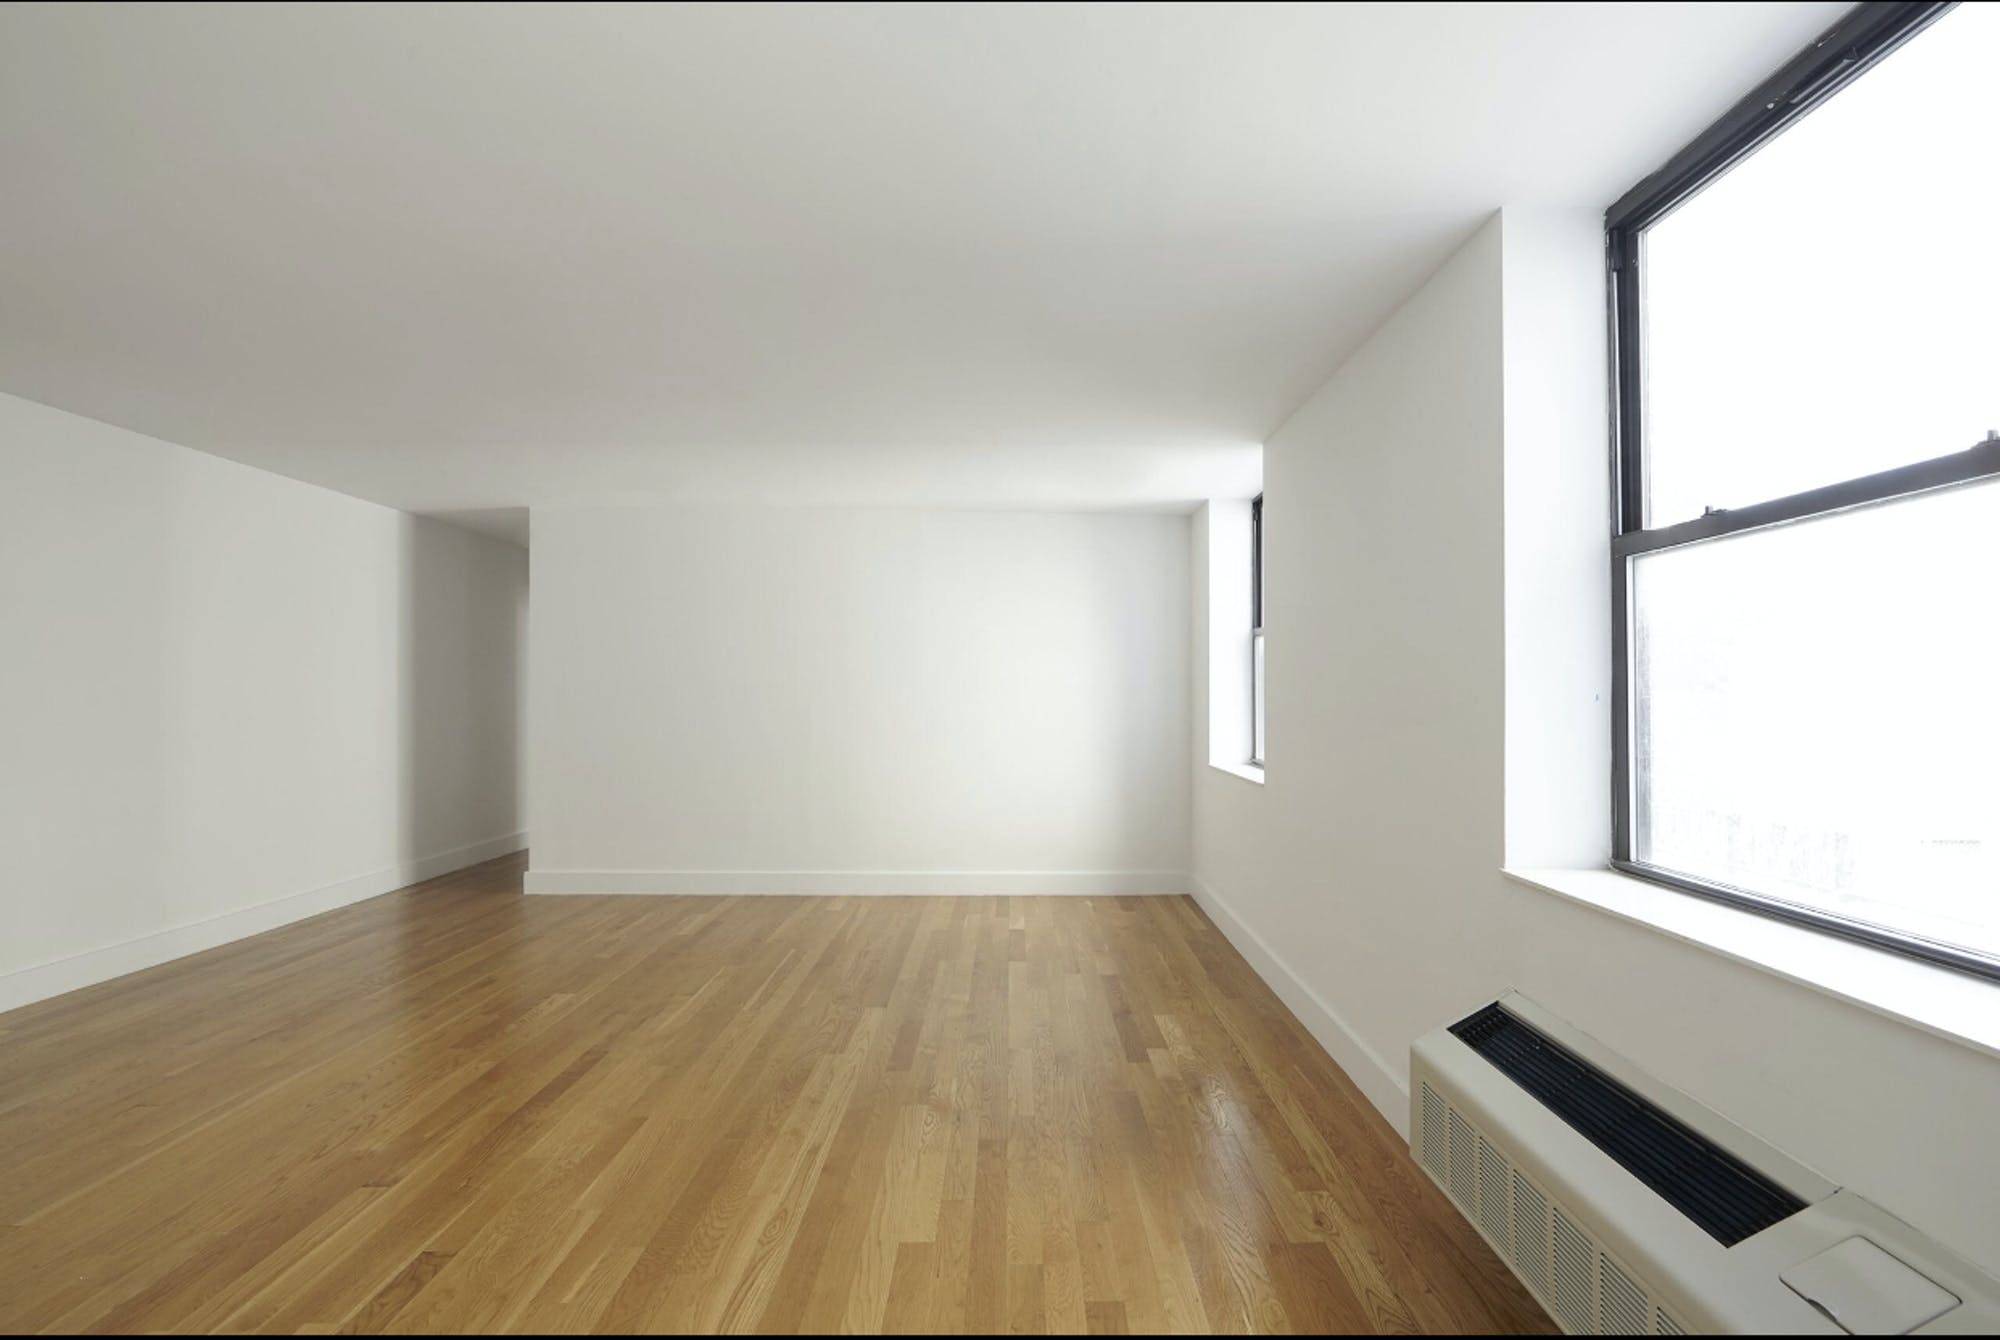 Welcome to Lofts QB ! This spacious 3 bedroom apartment is bright and sunny as it is refreshingly large.